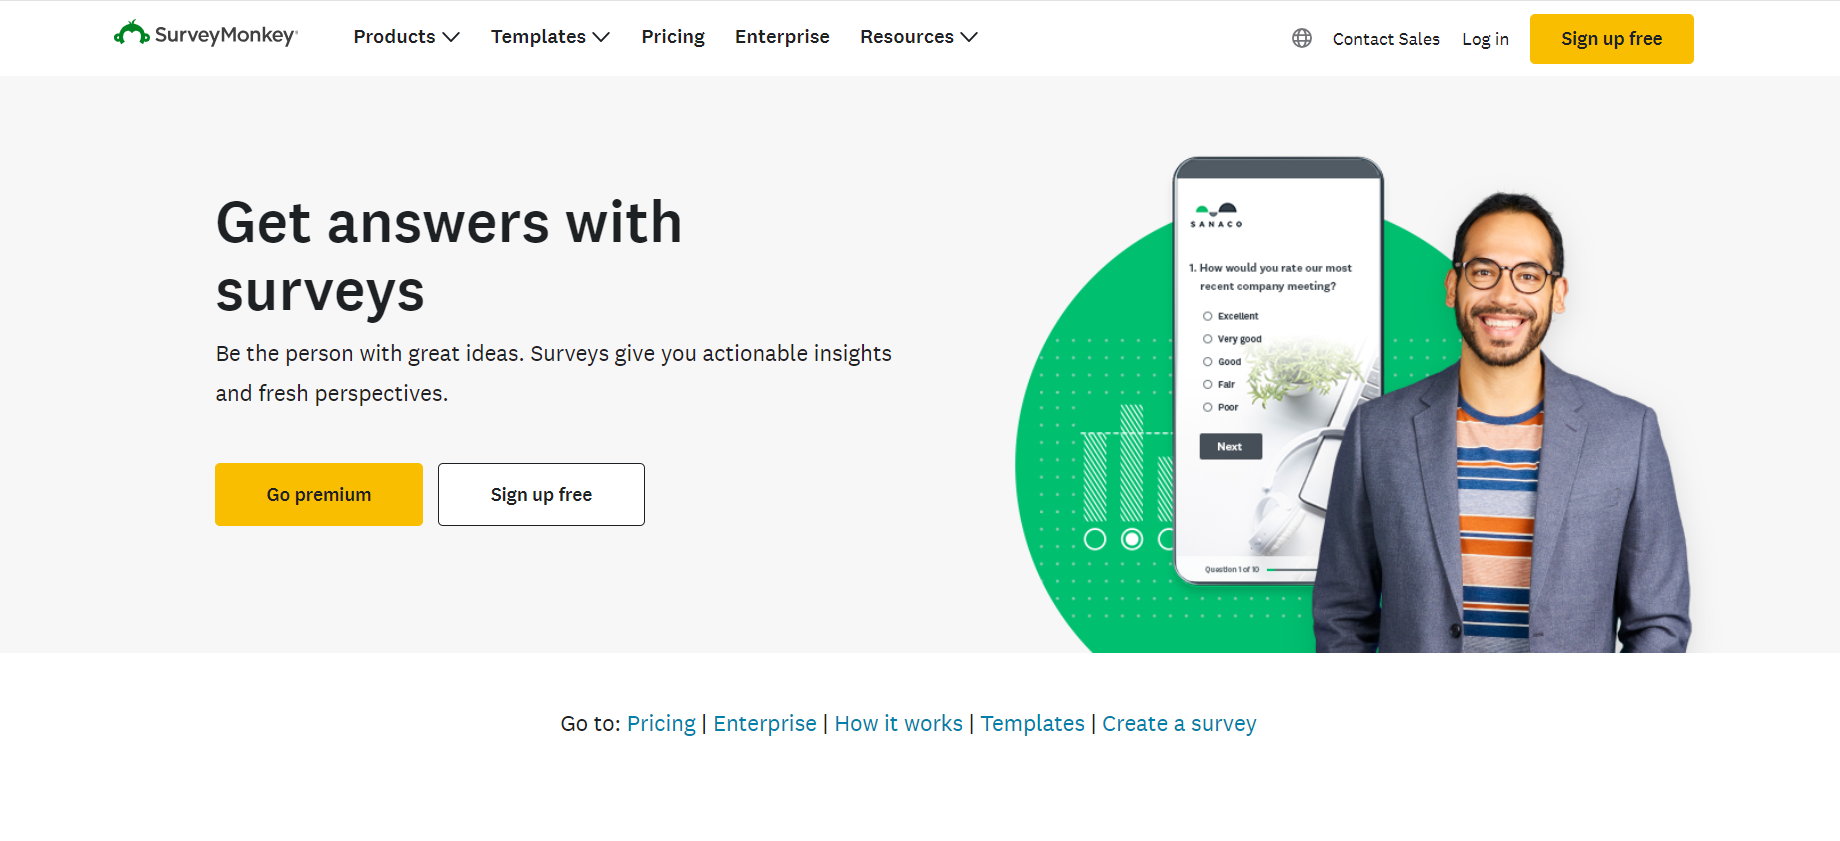 This is the image of the Home page of SurveyMonkey for surveys. 